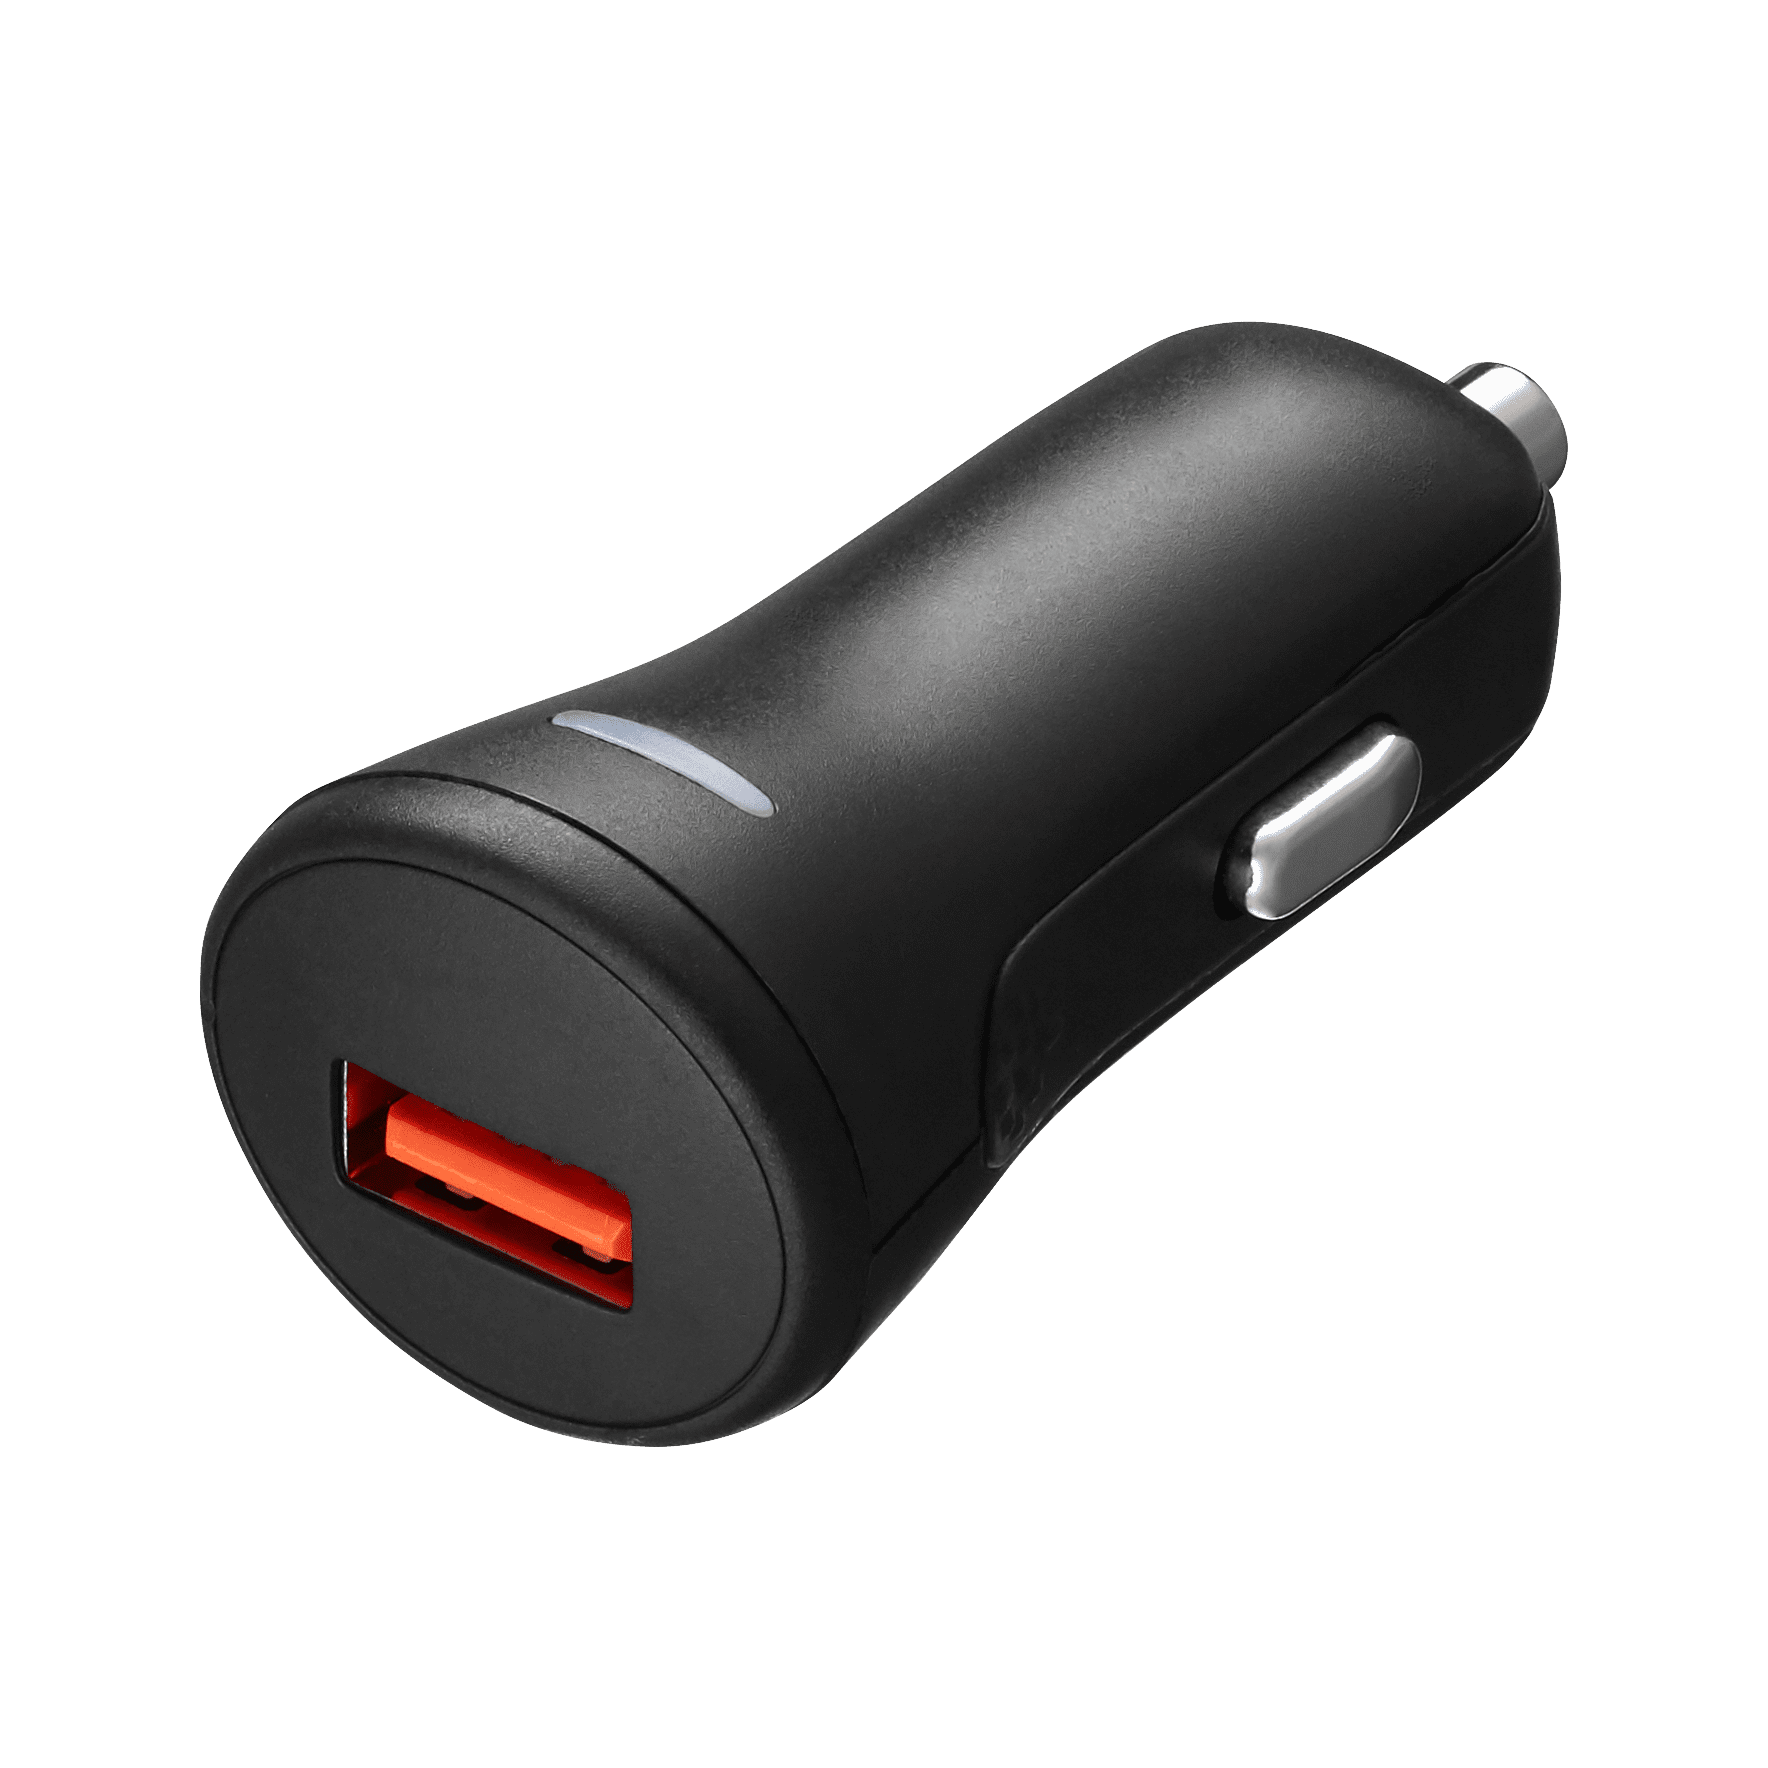 TPQ-305 Single USB port with LED quick charge 3.0 Car charger